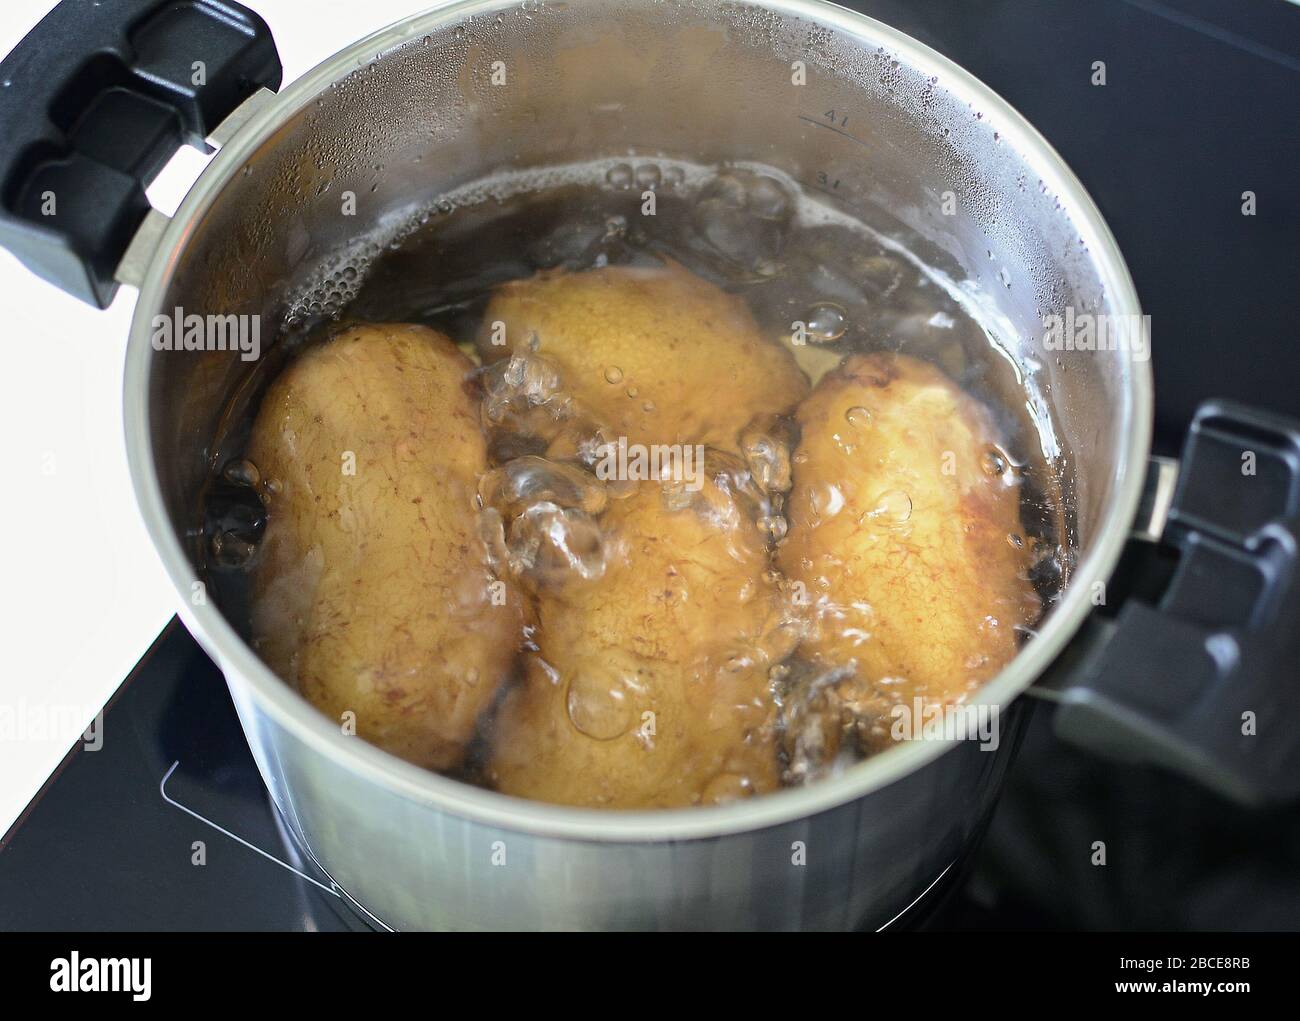 Top view of boiling whole potatoes in hot water in silver saucepan. Stock Photo